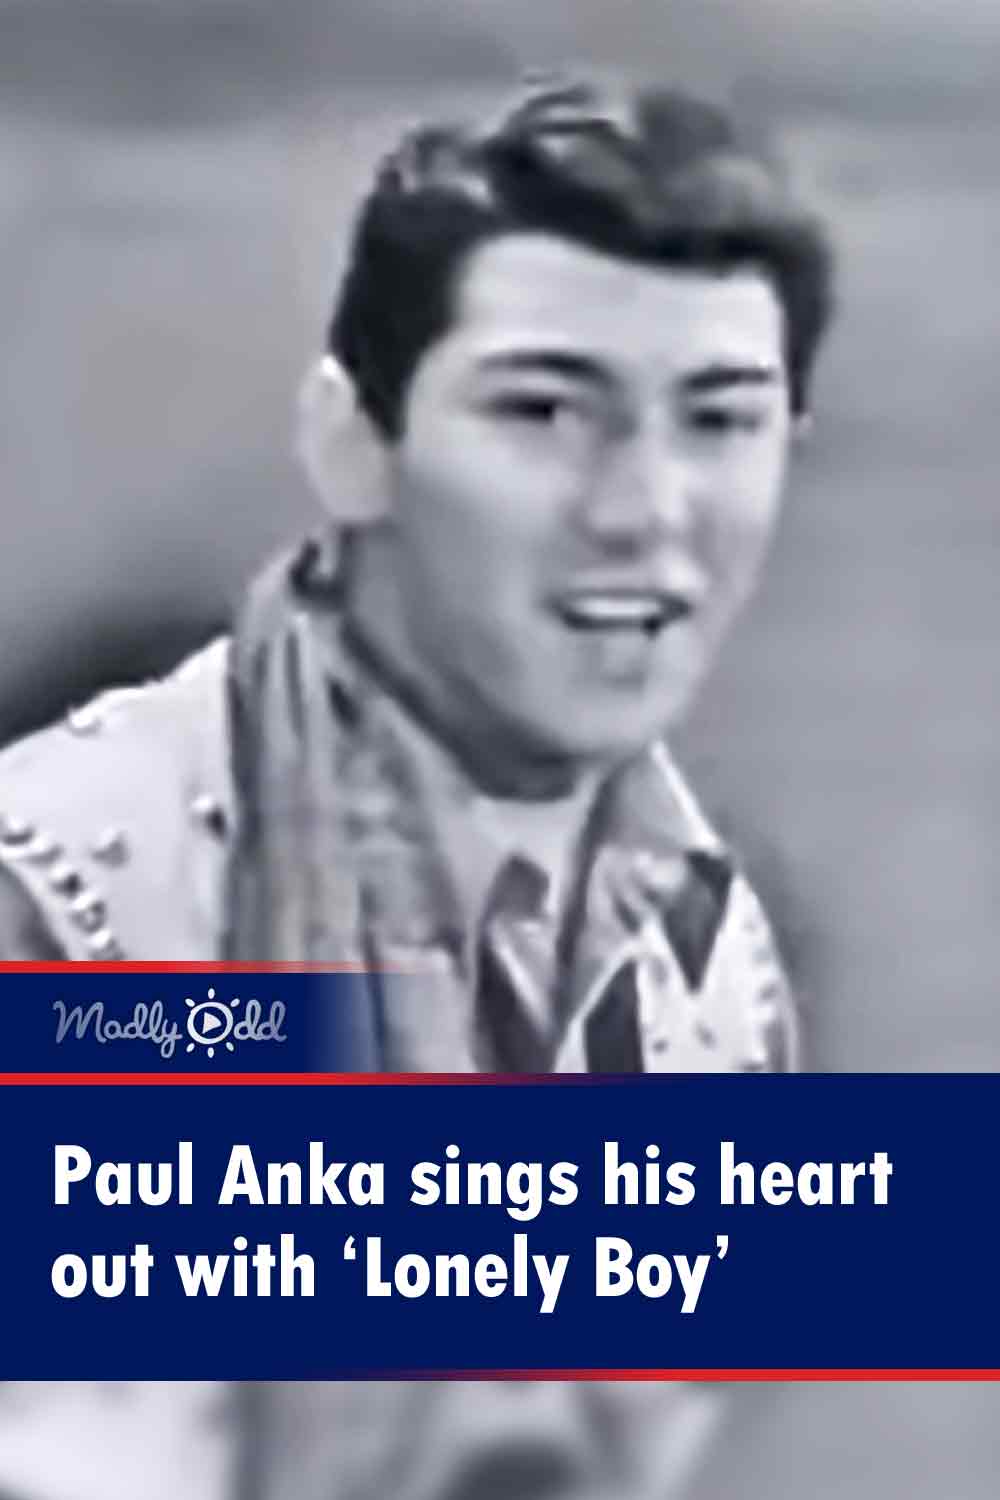 Paul Anka sings his heart out with ‘Lonely Boy’